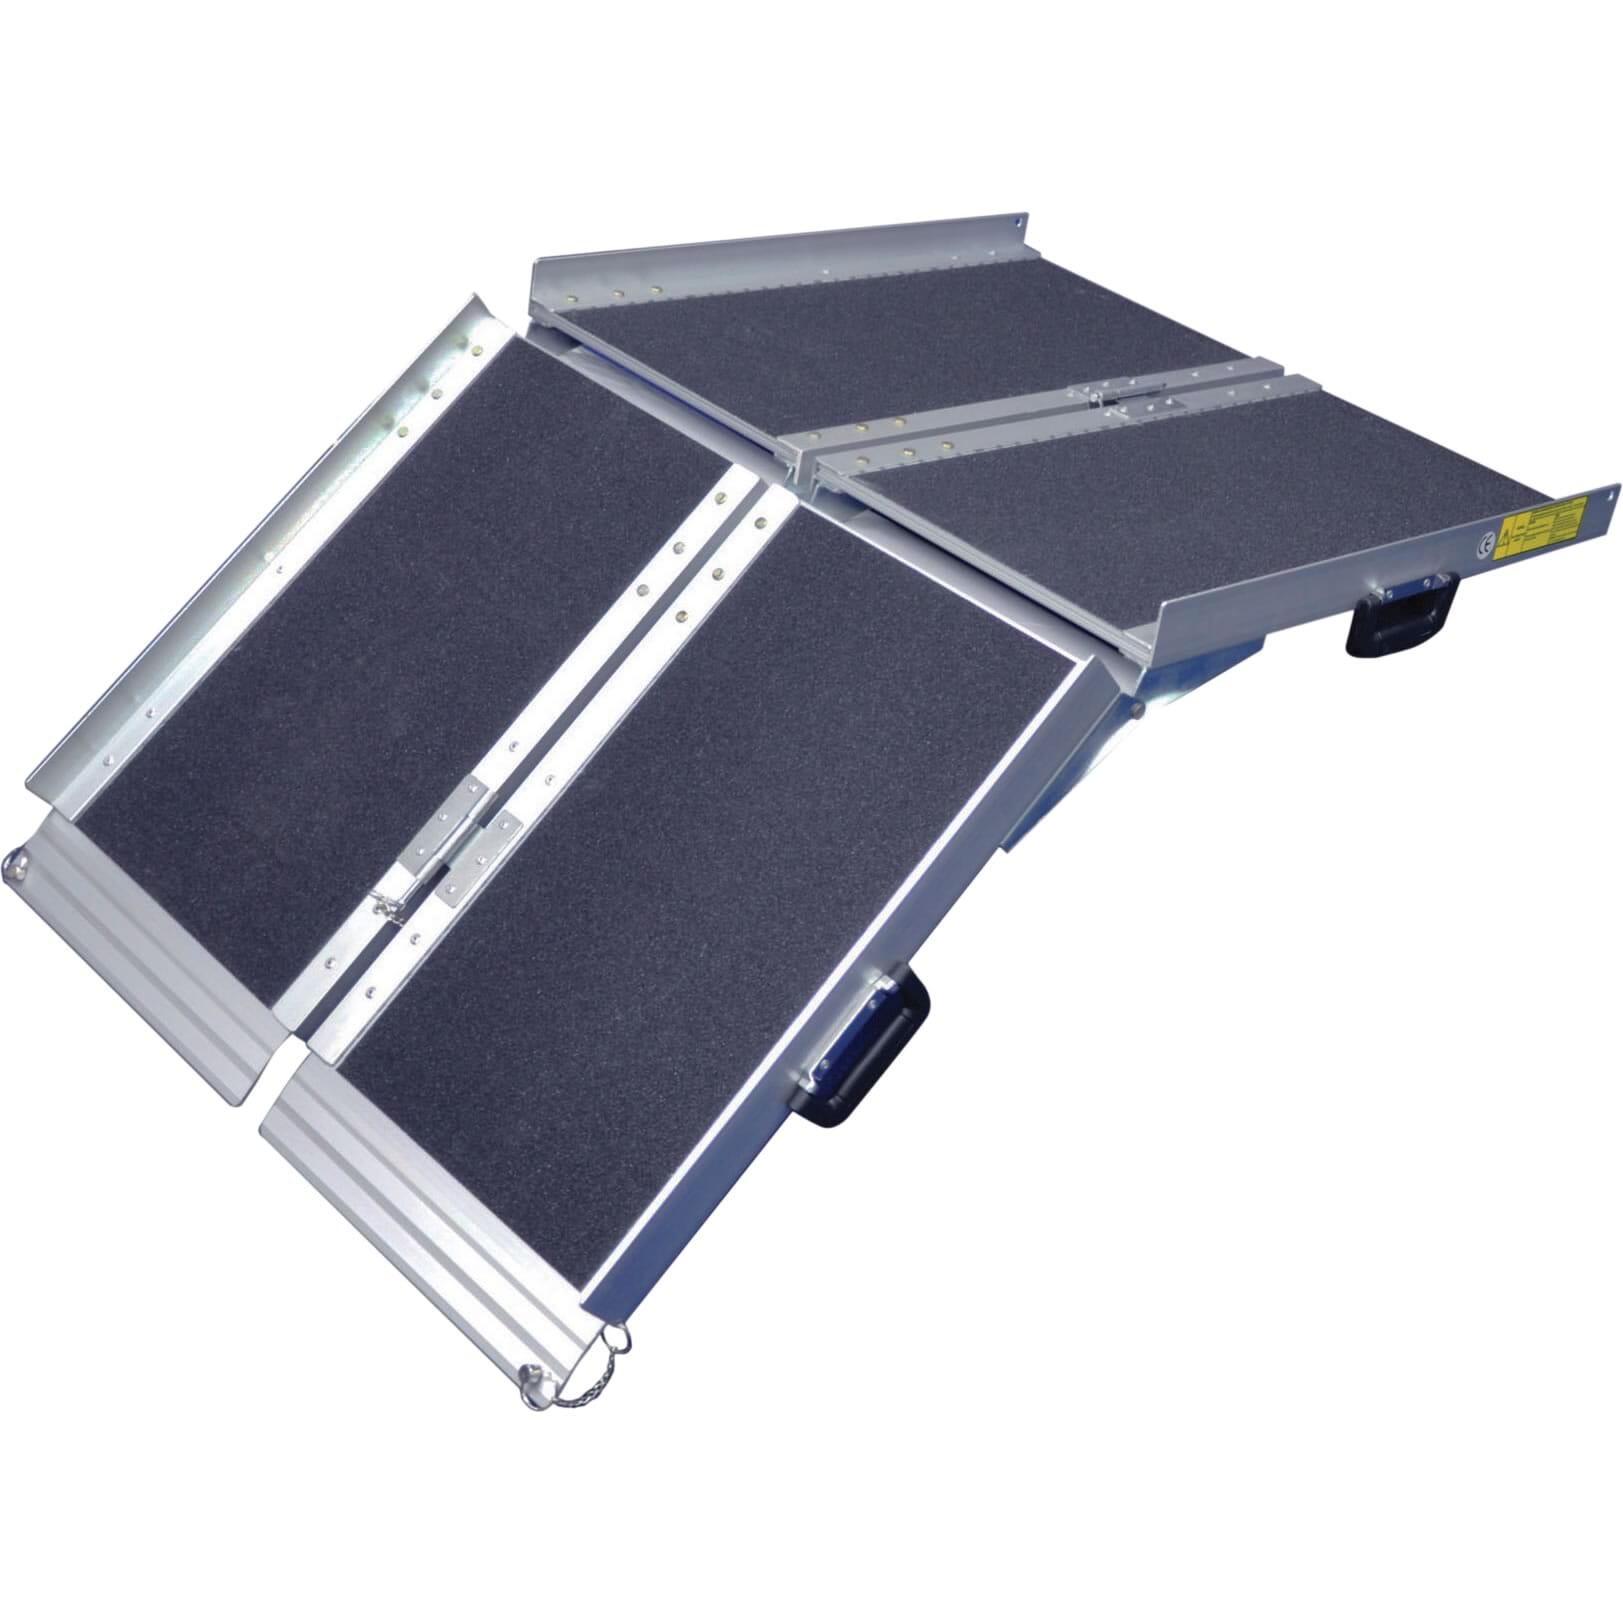 View Multifold Economy Wheelchair Ramps with Grip Surface 6ft 1830mm information